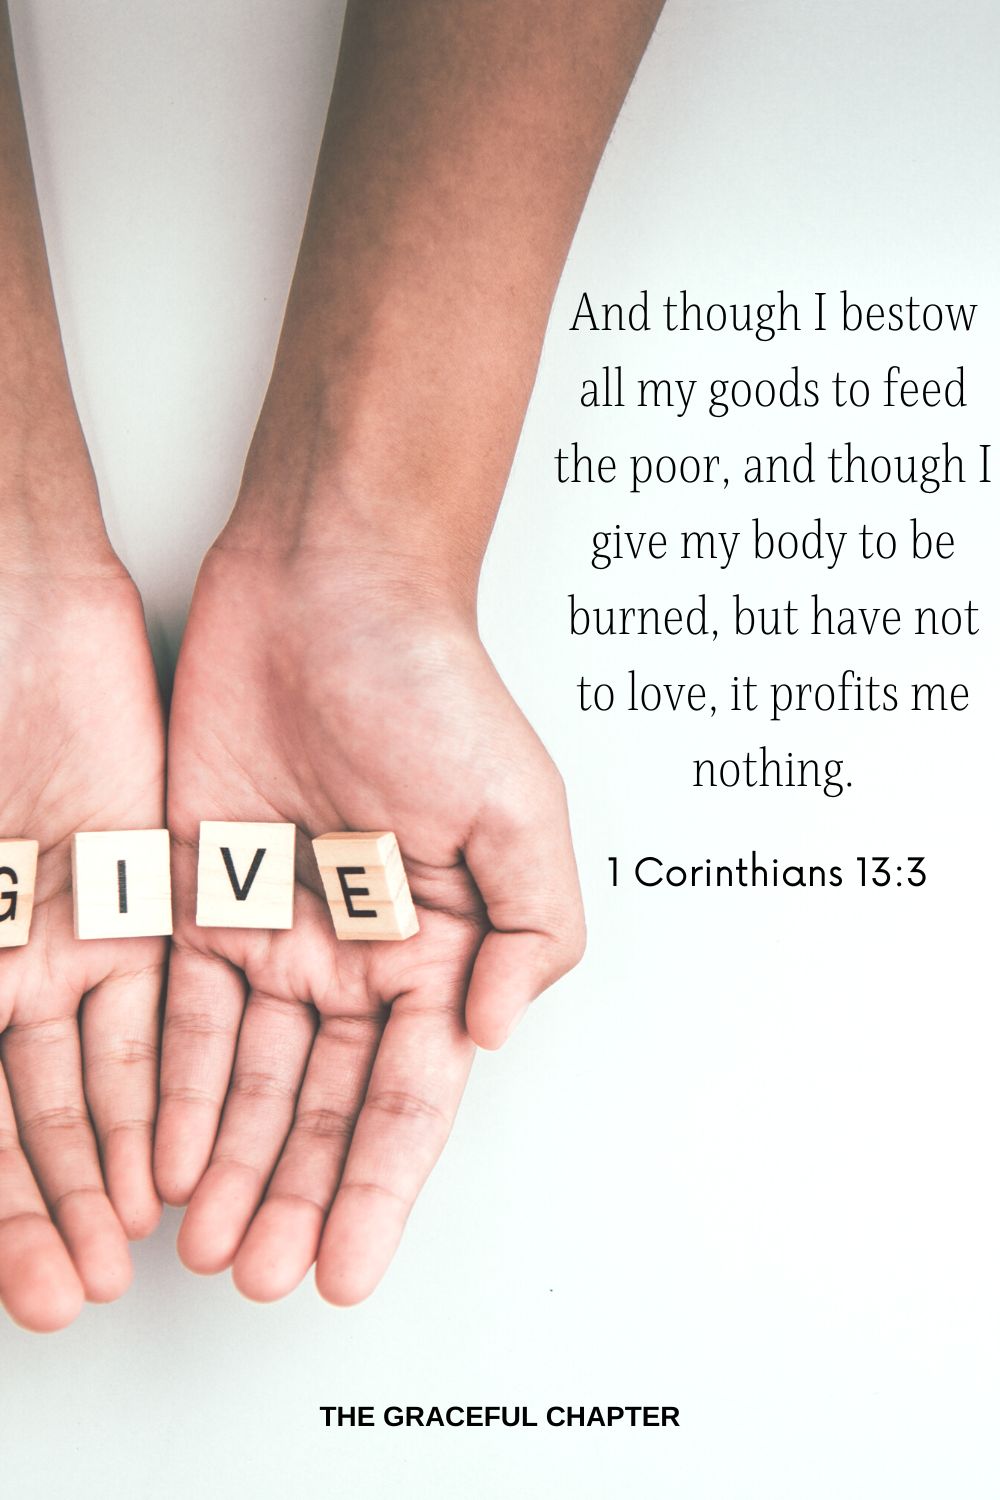 And though I bestow all my goods to feed the poor, and though I give my body to be burned, but have not to love, it profits me nothing. 1 Corinthians 13:3